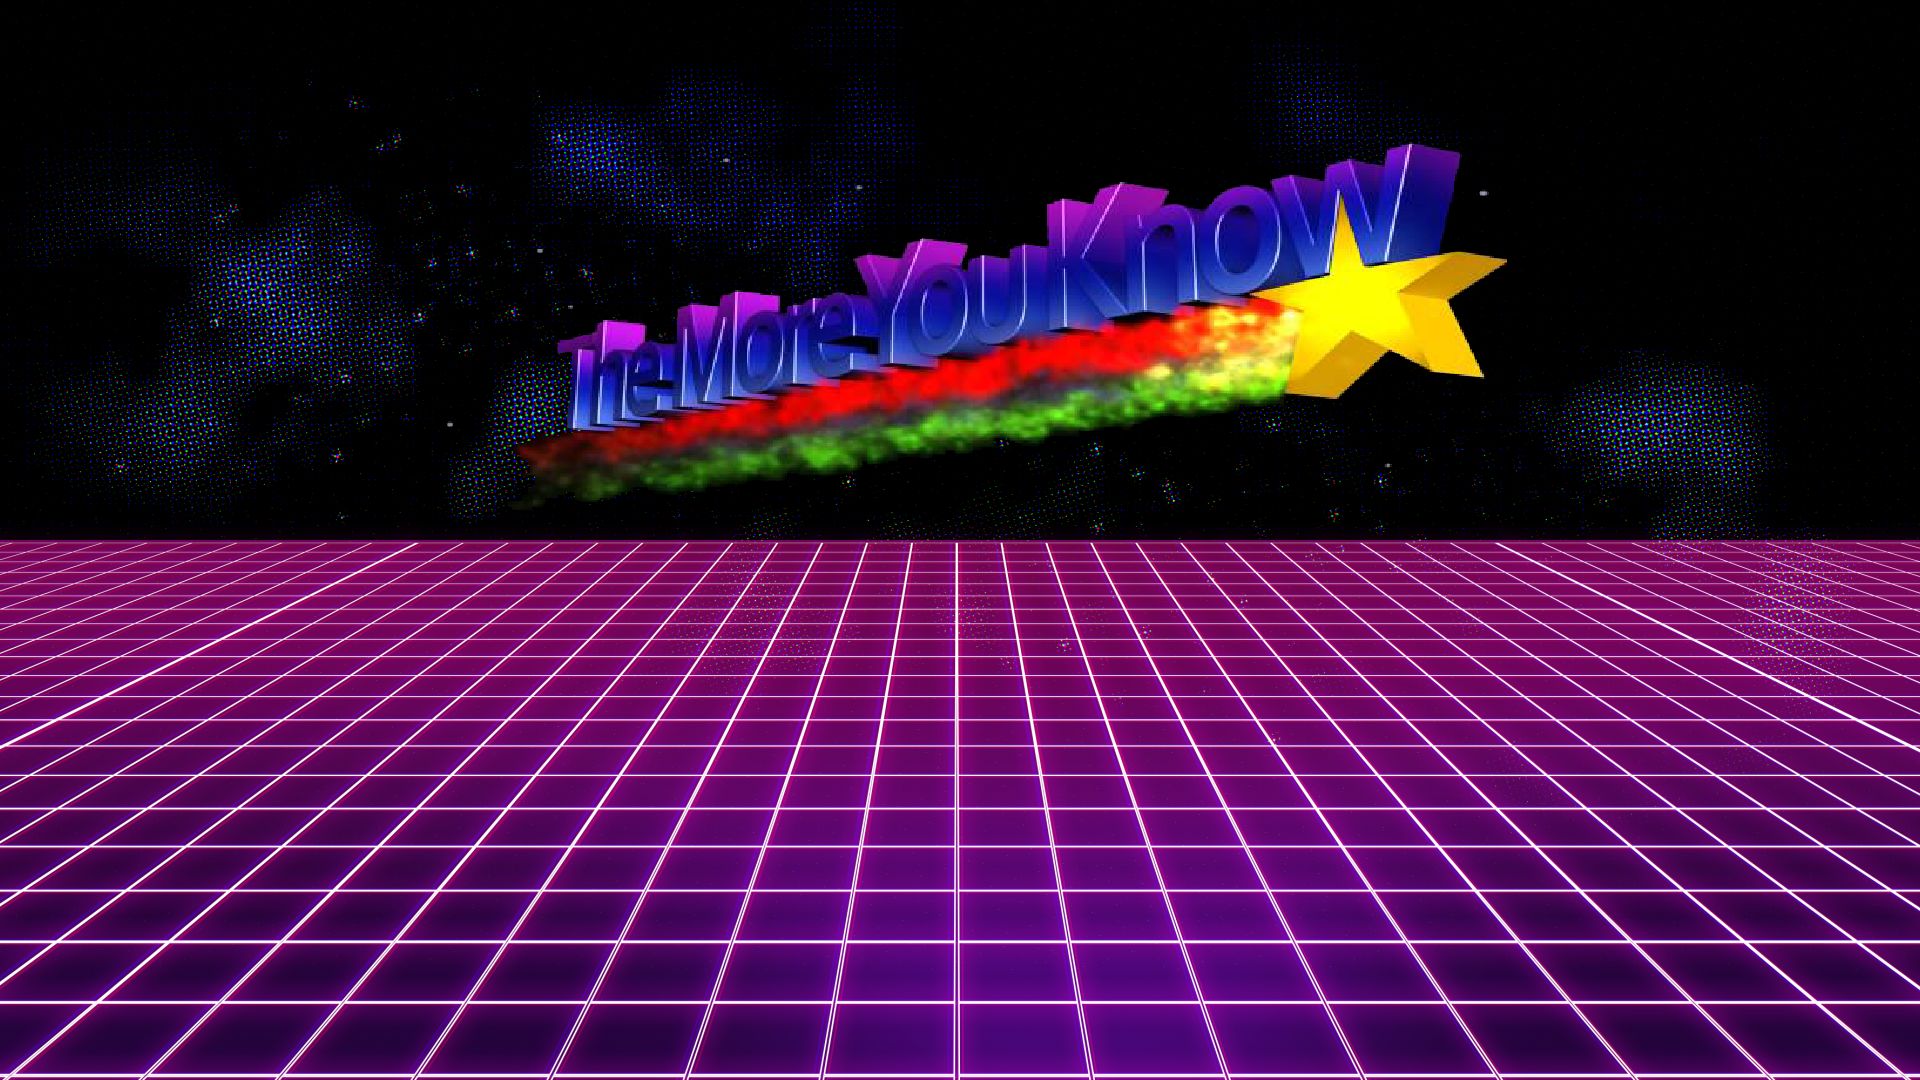 High Quality The More You Know. Synthwave. Retro Wave. Meme. Blank Meme Template